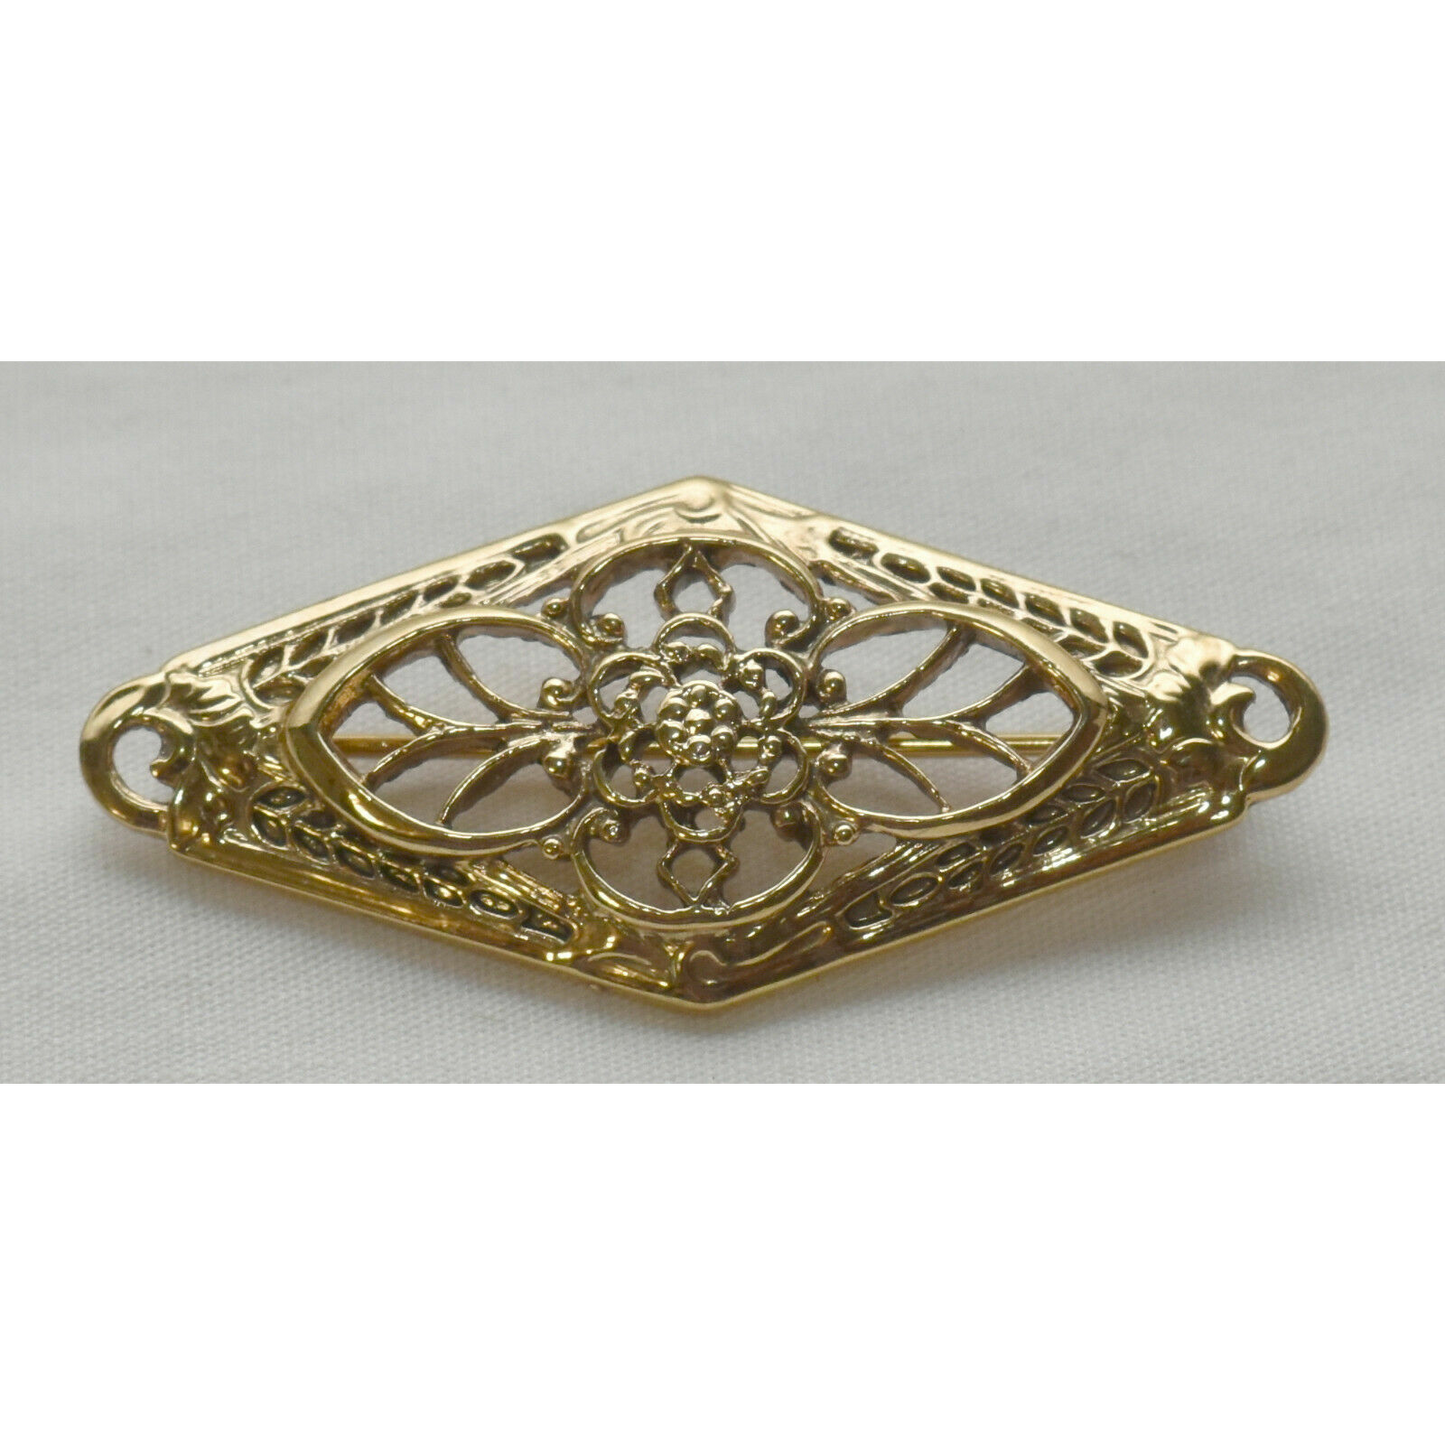 Vintage Floral Filigree Pin Brooch Gold Toned Triangular 2" Etched Brooch Mint